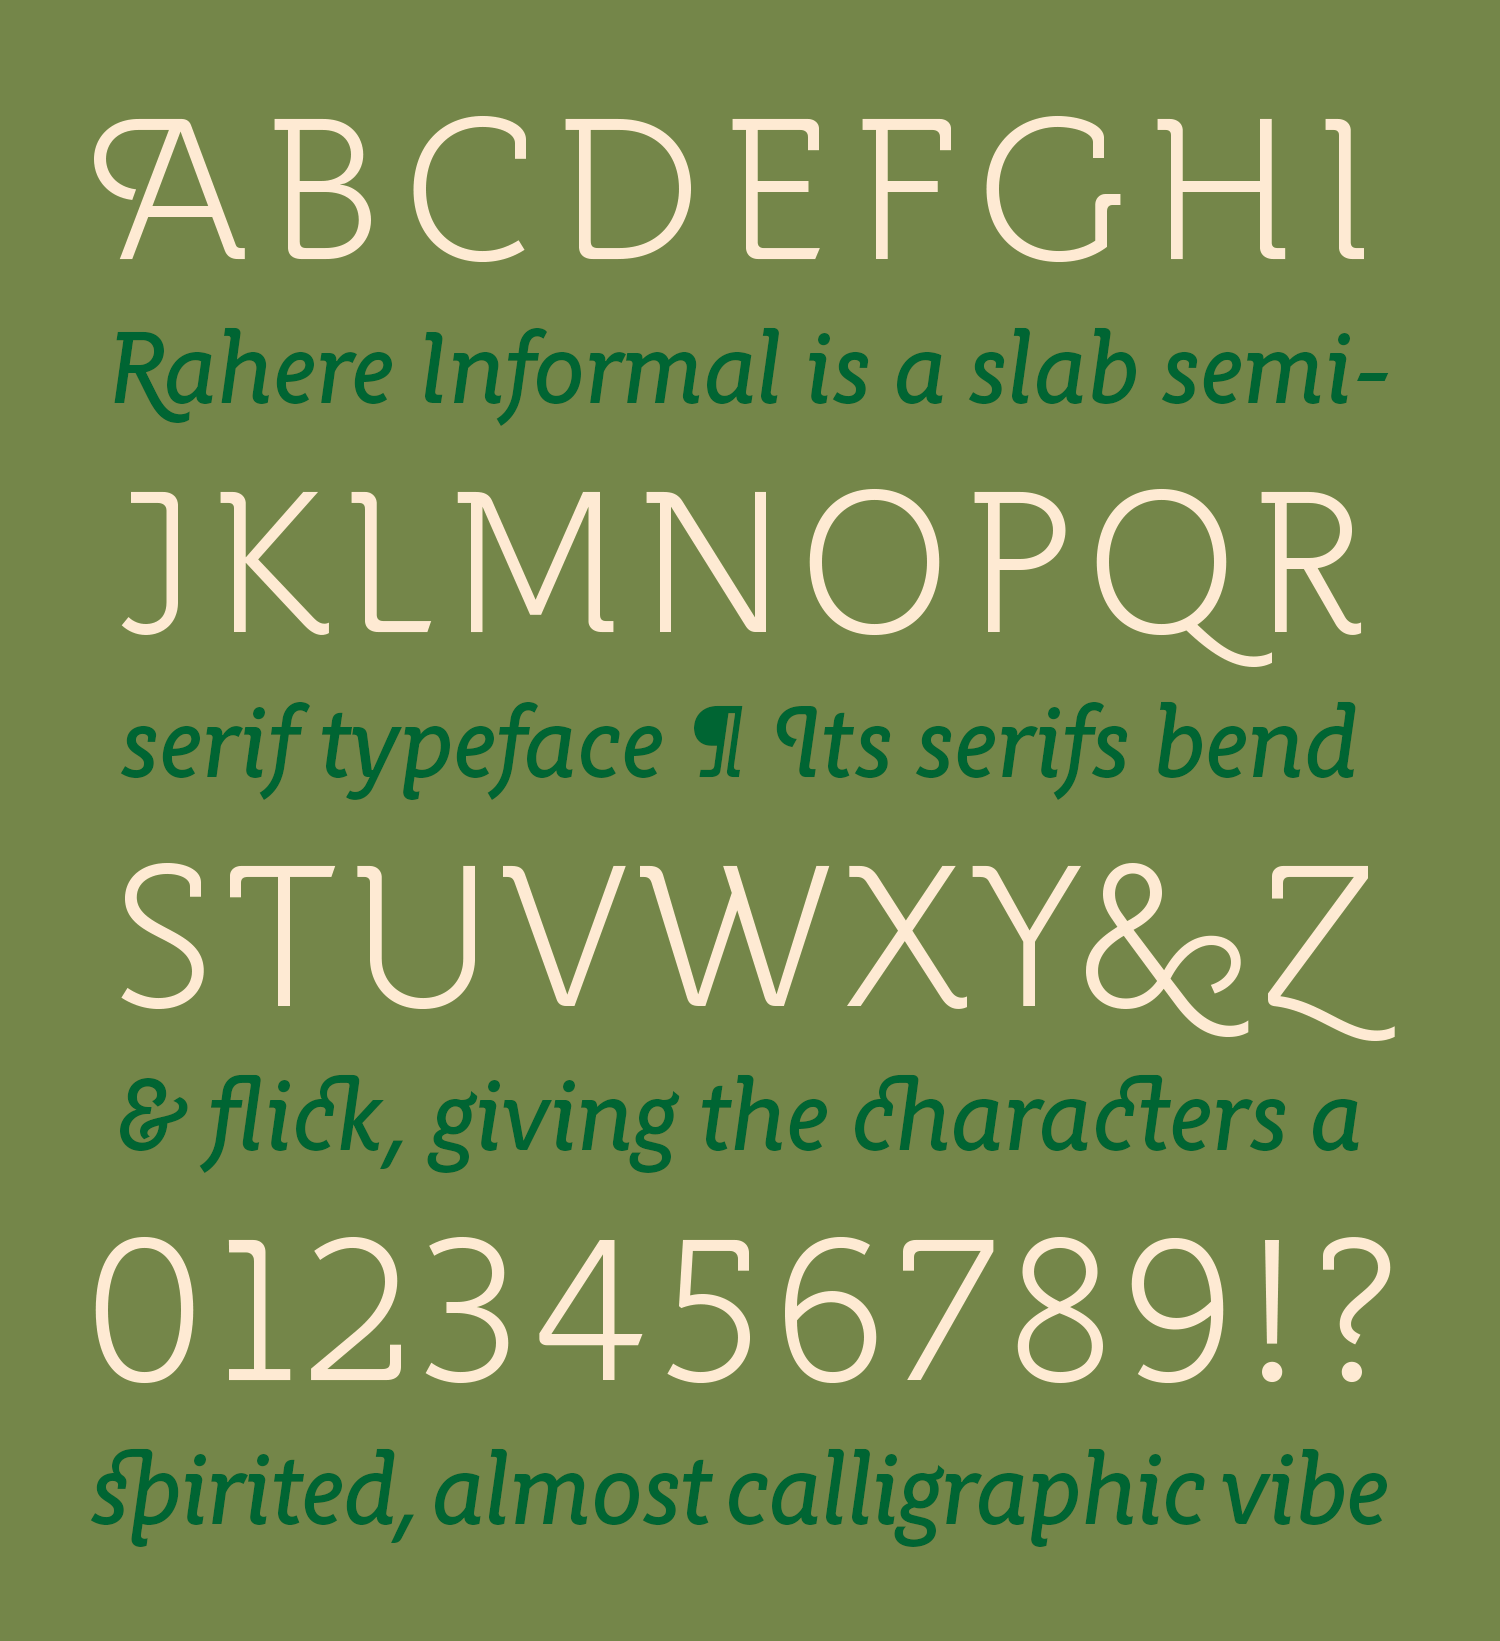 Rahere Informal typeface family with a spirited almost calligraphic vibe